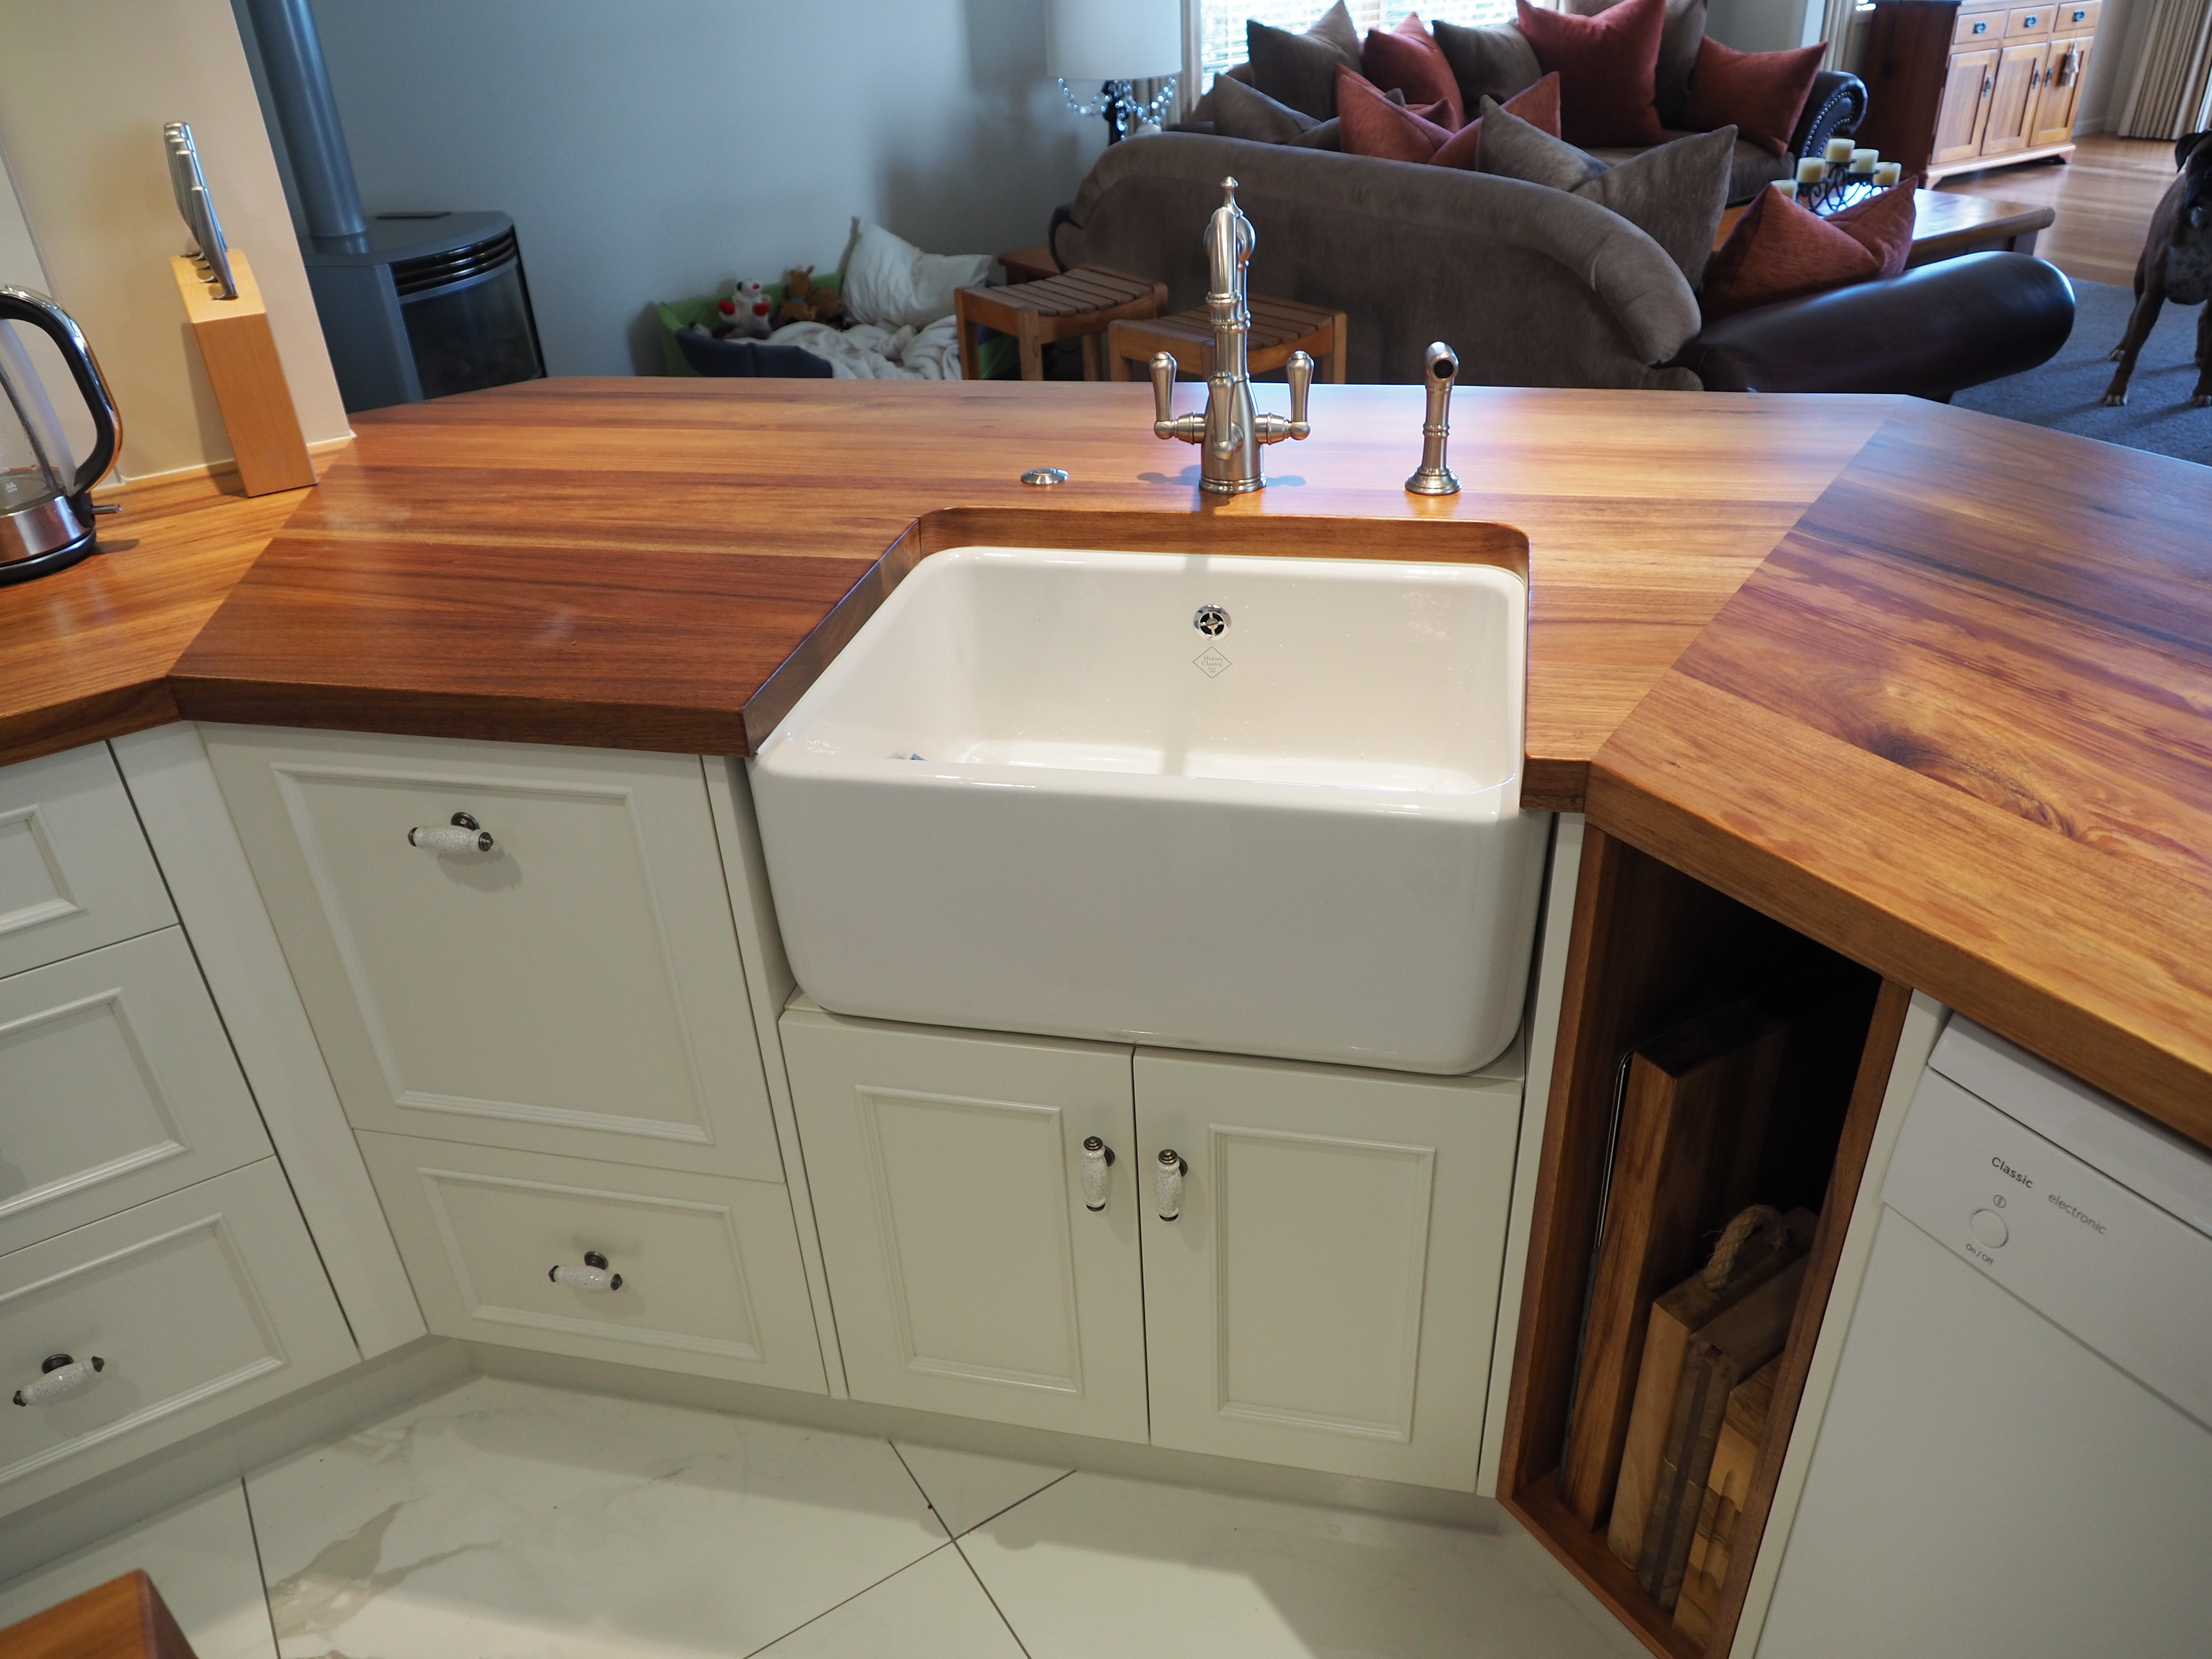 Titjens Butlers Sink, designed kitchen, handmade best quality Offering custom made furniture, sculleries, laundries, bathroom, doors locally owned and operated full service kitchen design specialists